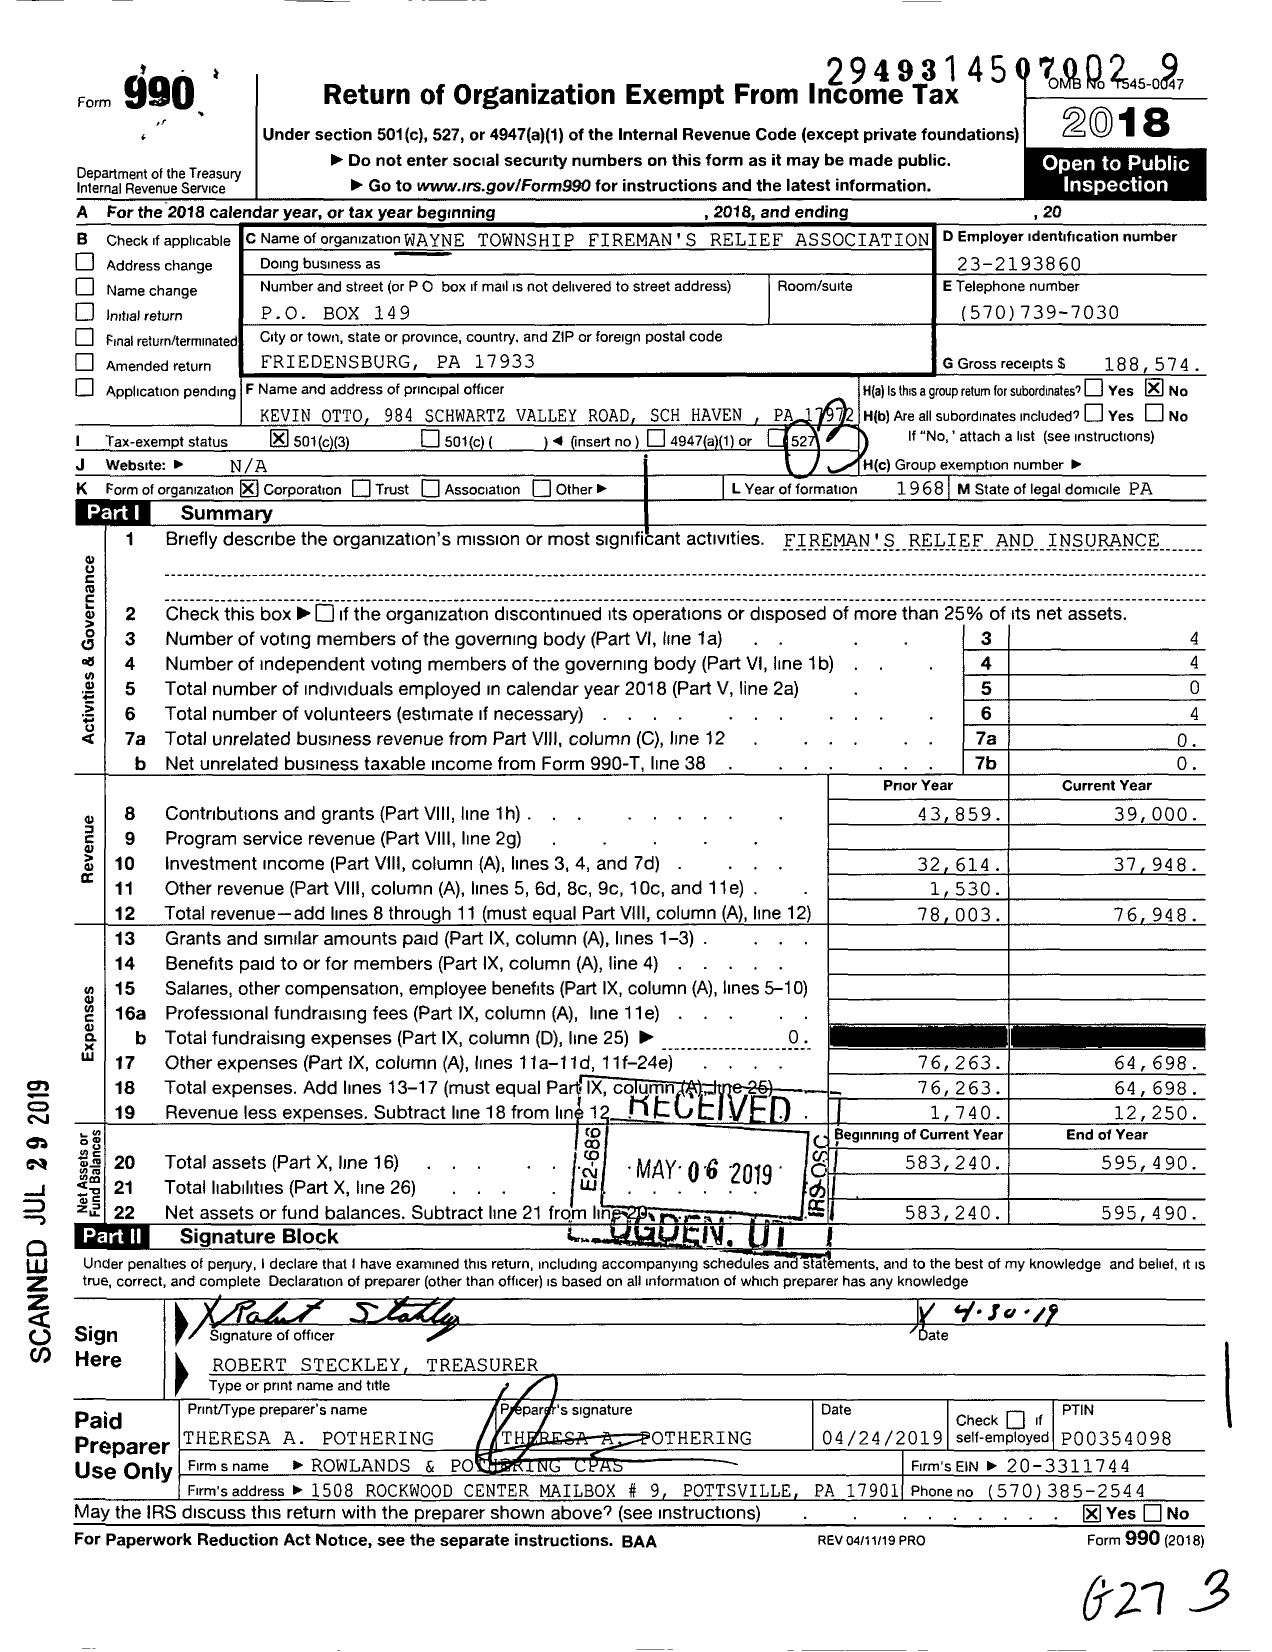 Image of first page of 2018 Form 990 for Wayne Township Fireman's Relief Association